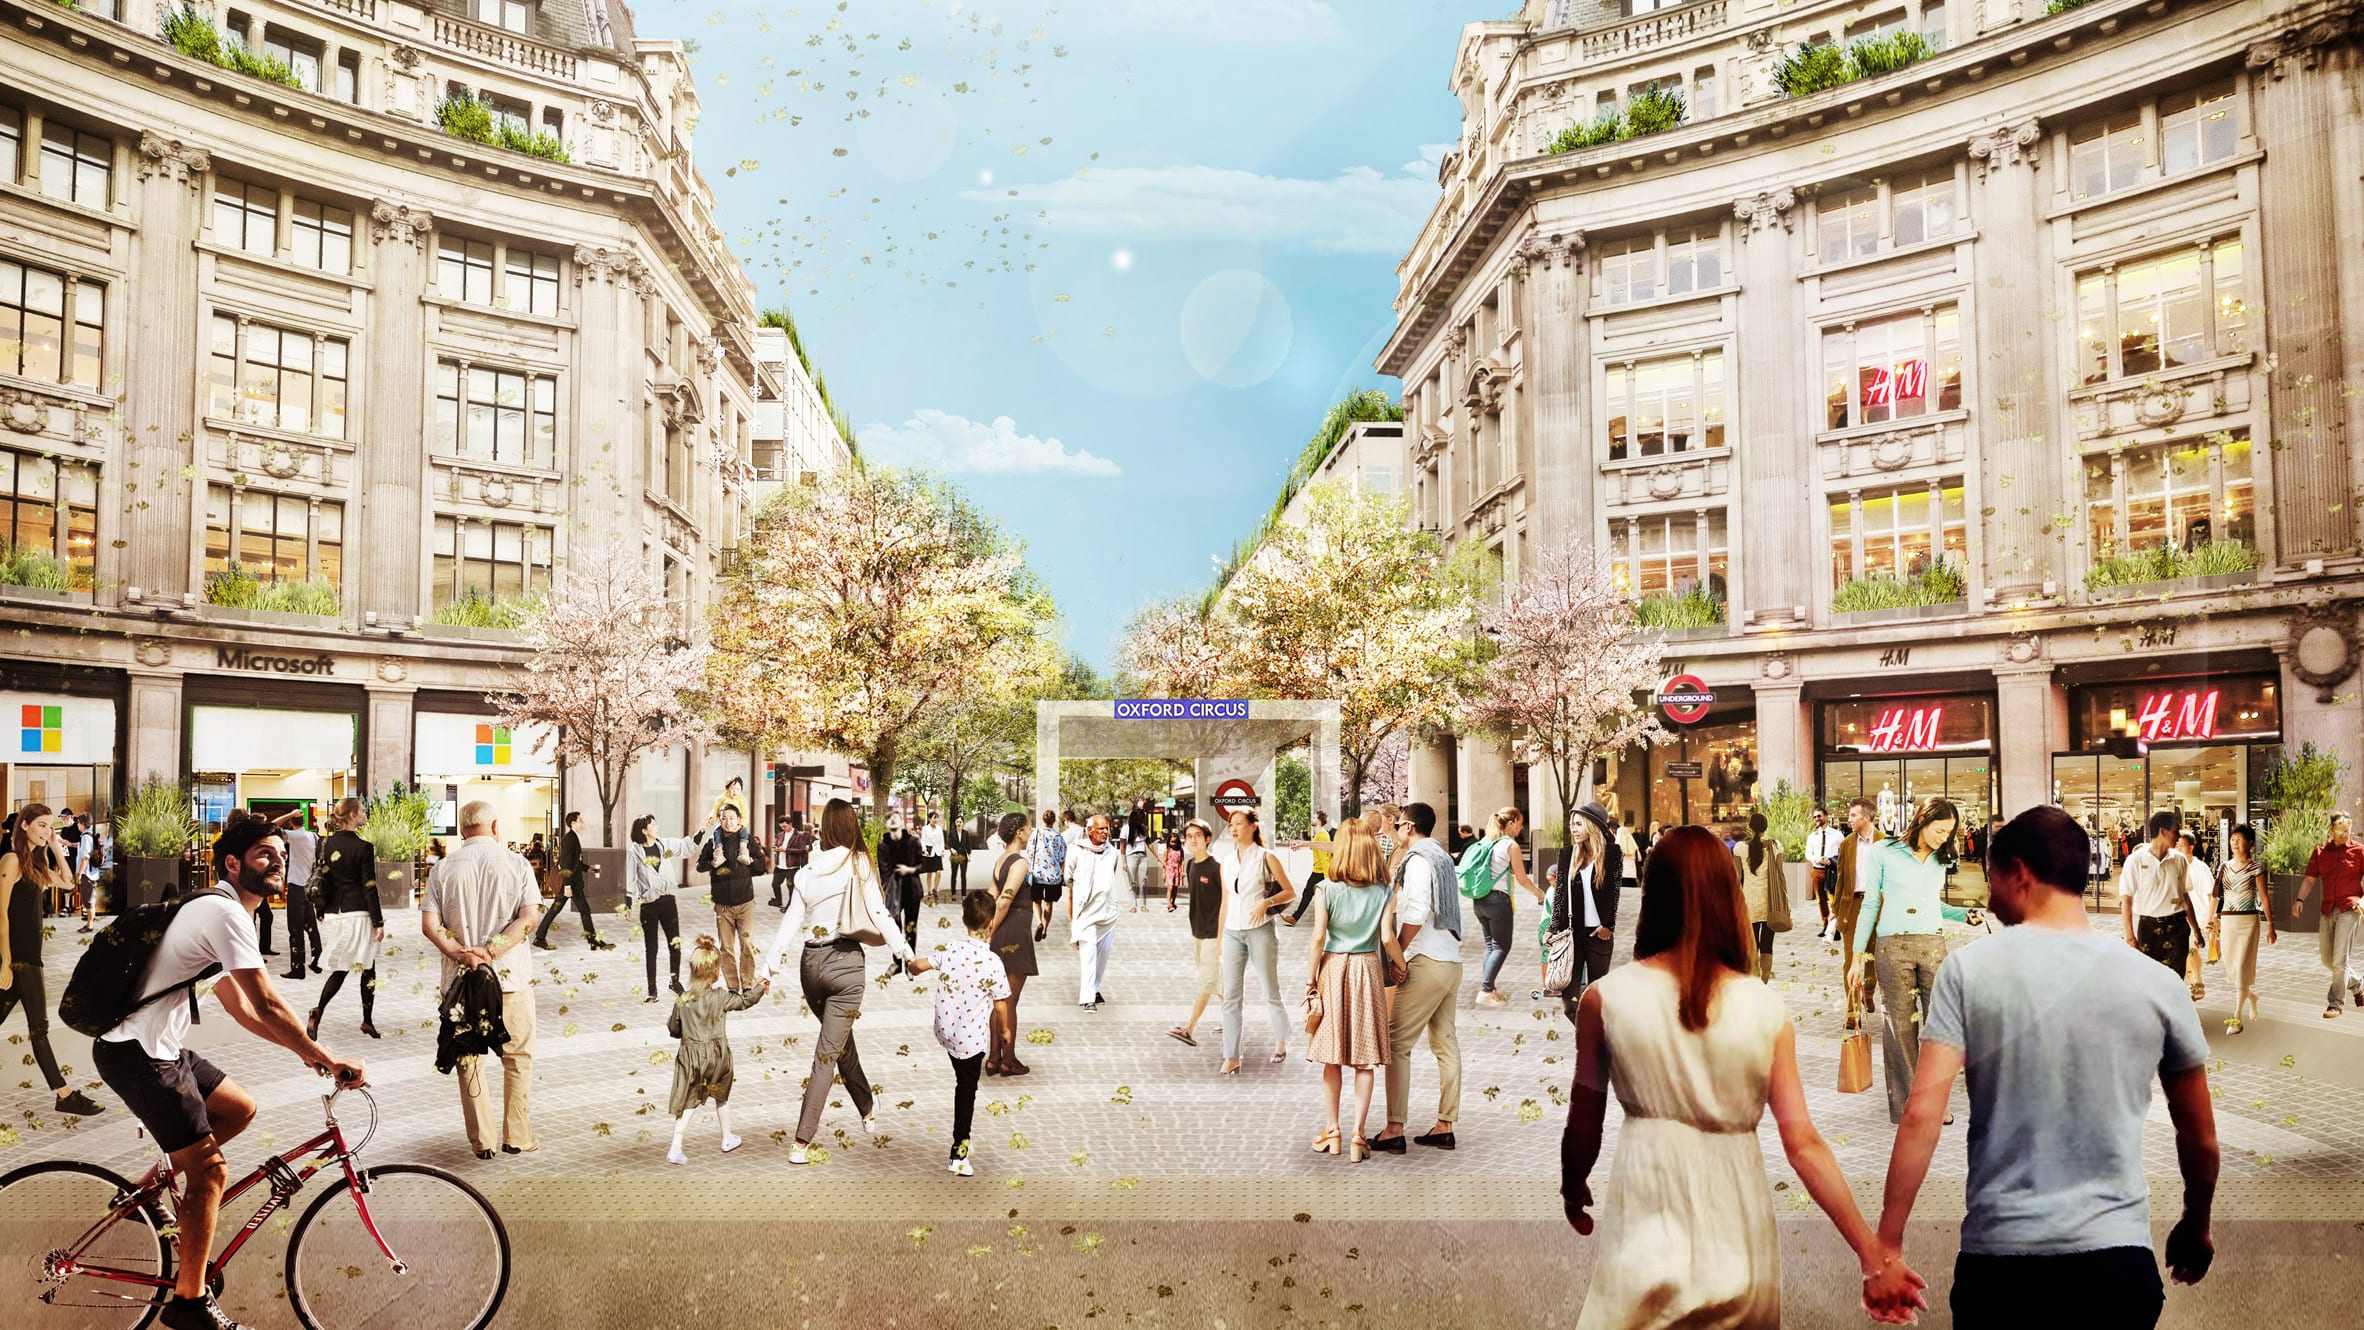 A visual of pedestrianised Oxford Circus